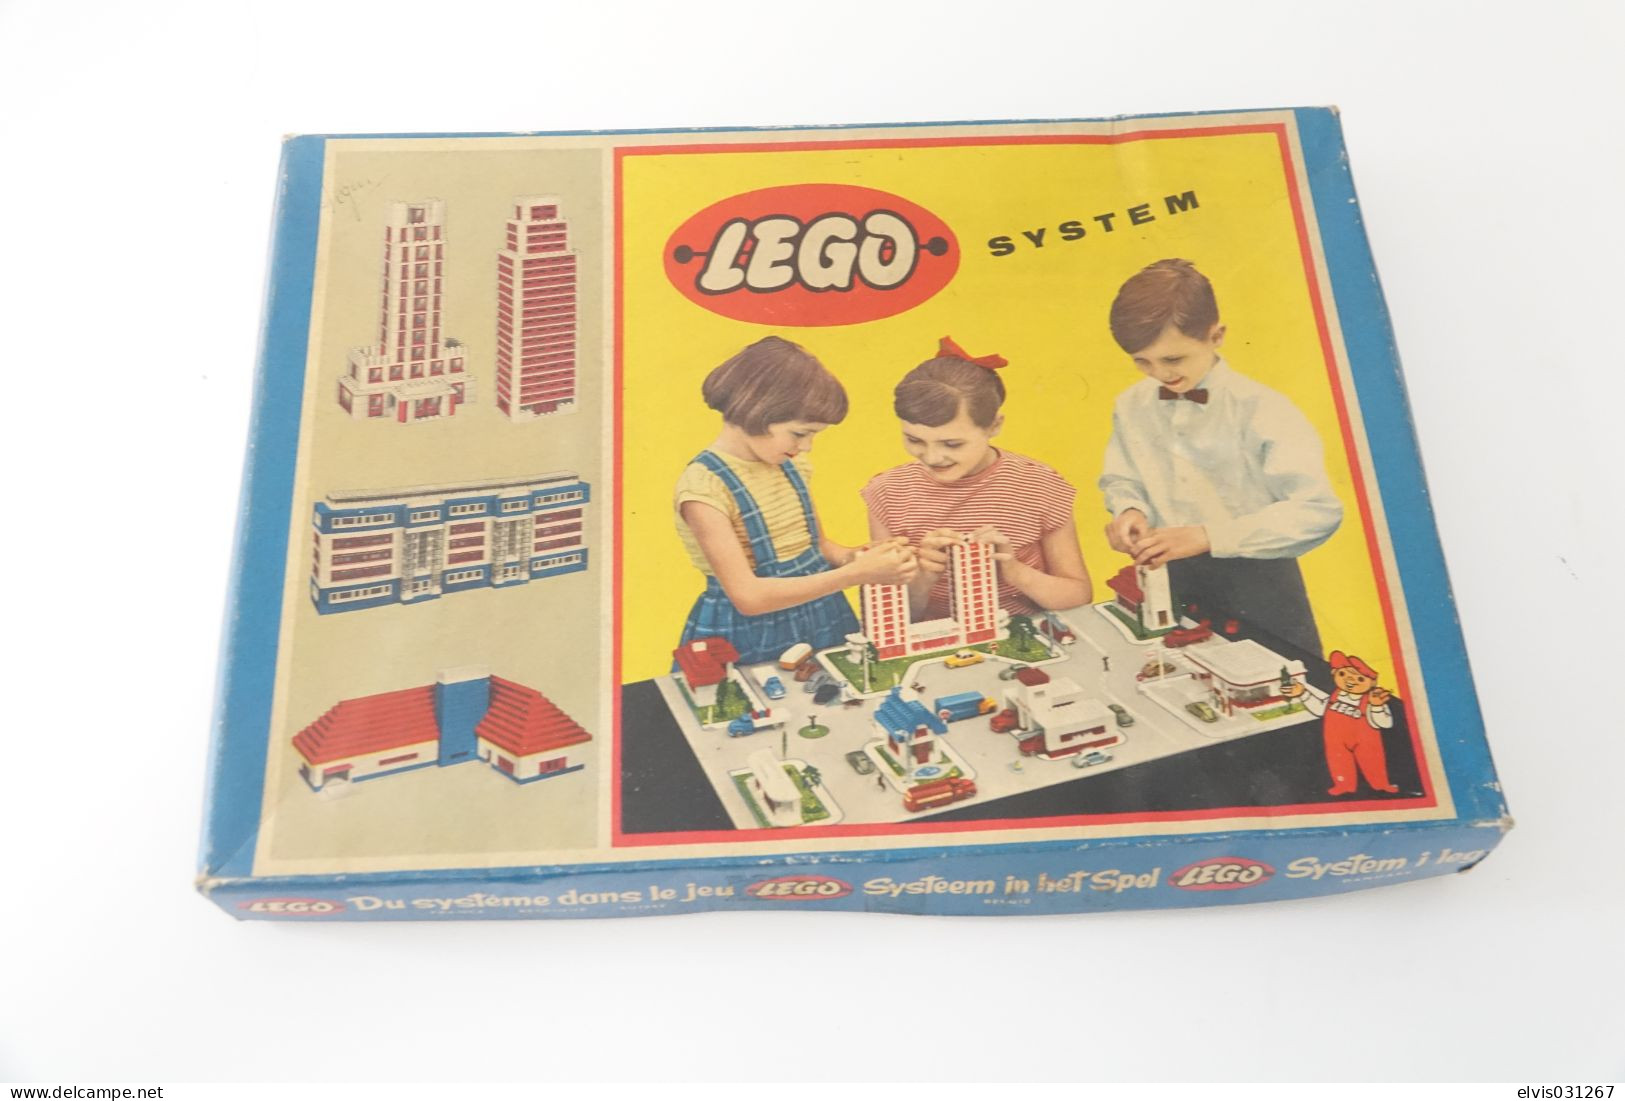 LEGO - 700/3a Gift Package (Lego Mursten) Extremely Rare BOX ONLY - Collector Item - Original Lego 1954 - Vintage - Cataloghi